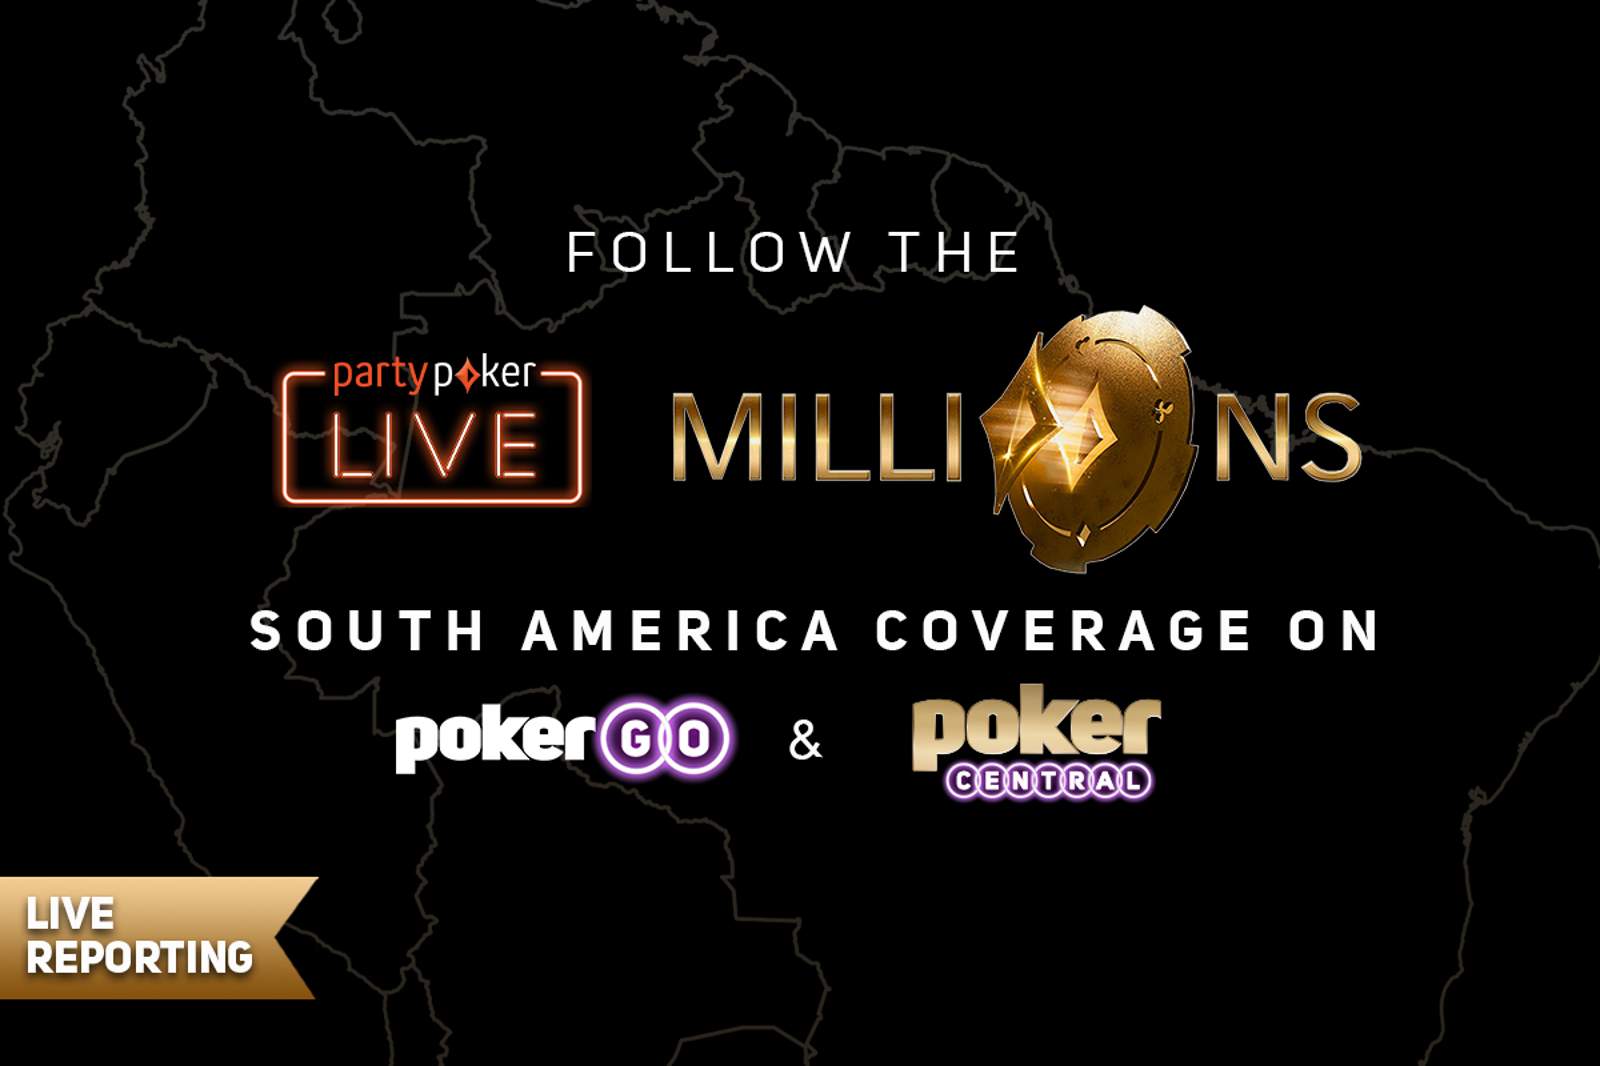 Follow The partypoker LIVE MILLIONS South America Coverage on Poker Central & PokerGO